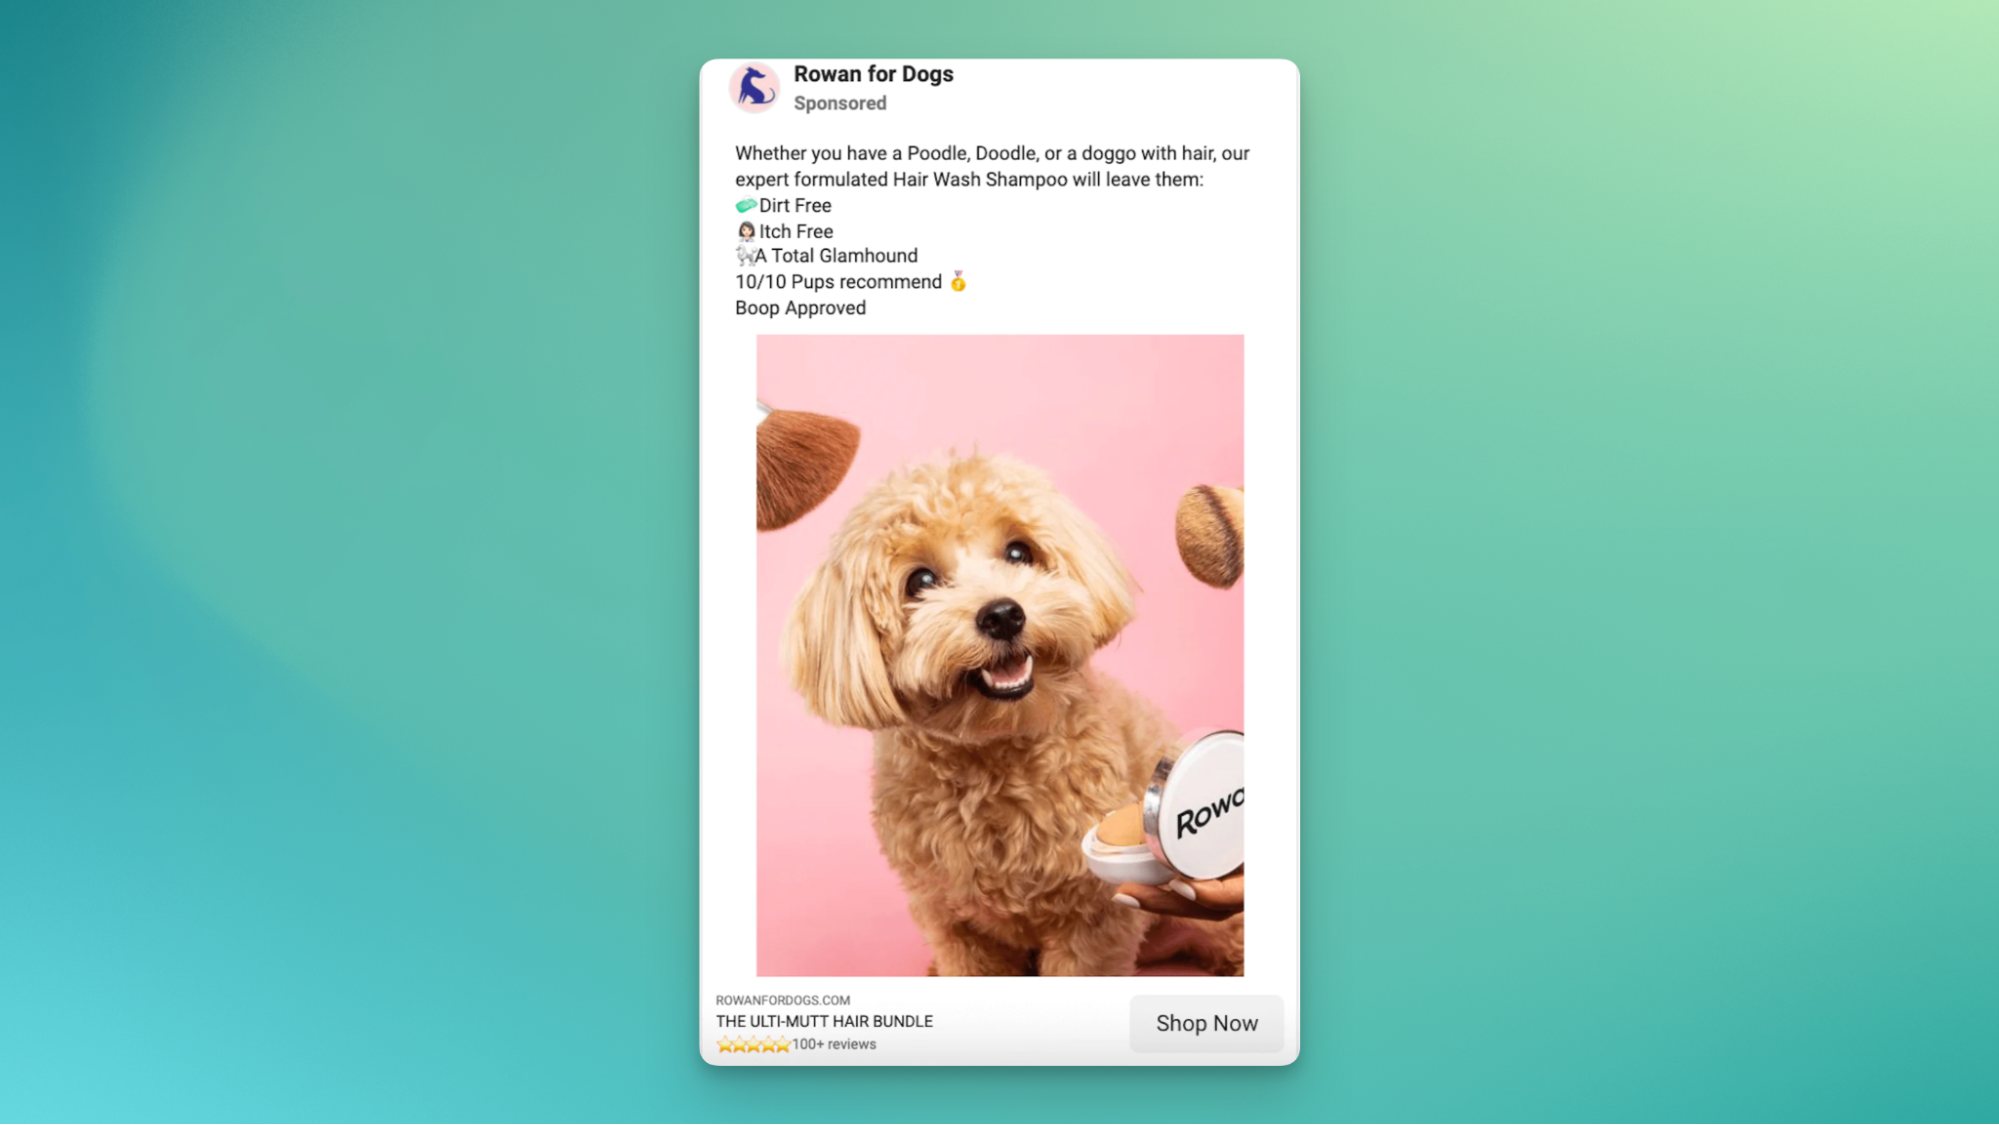 Example of a paid social media advertising campaign for pet shampoo featuring a cute, small dog.